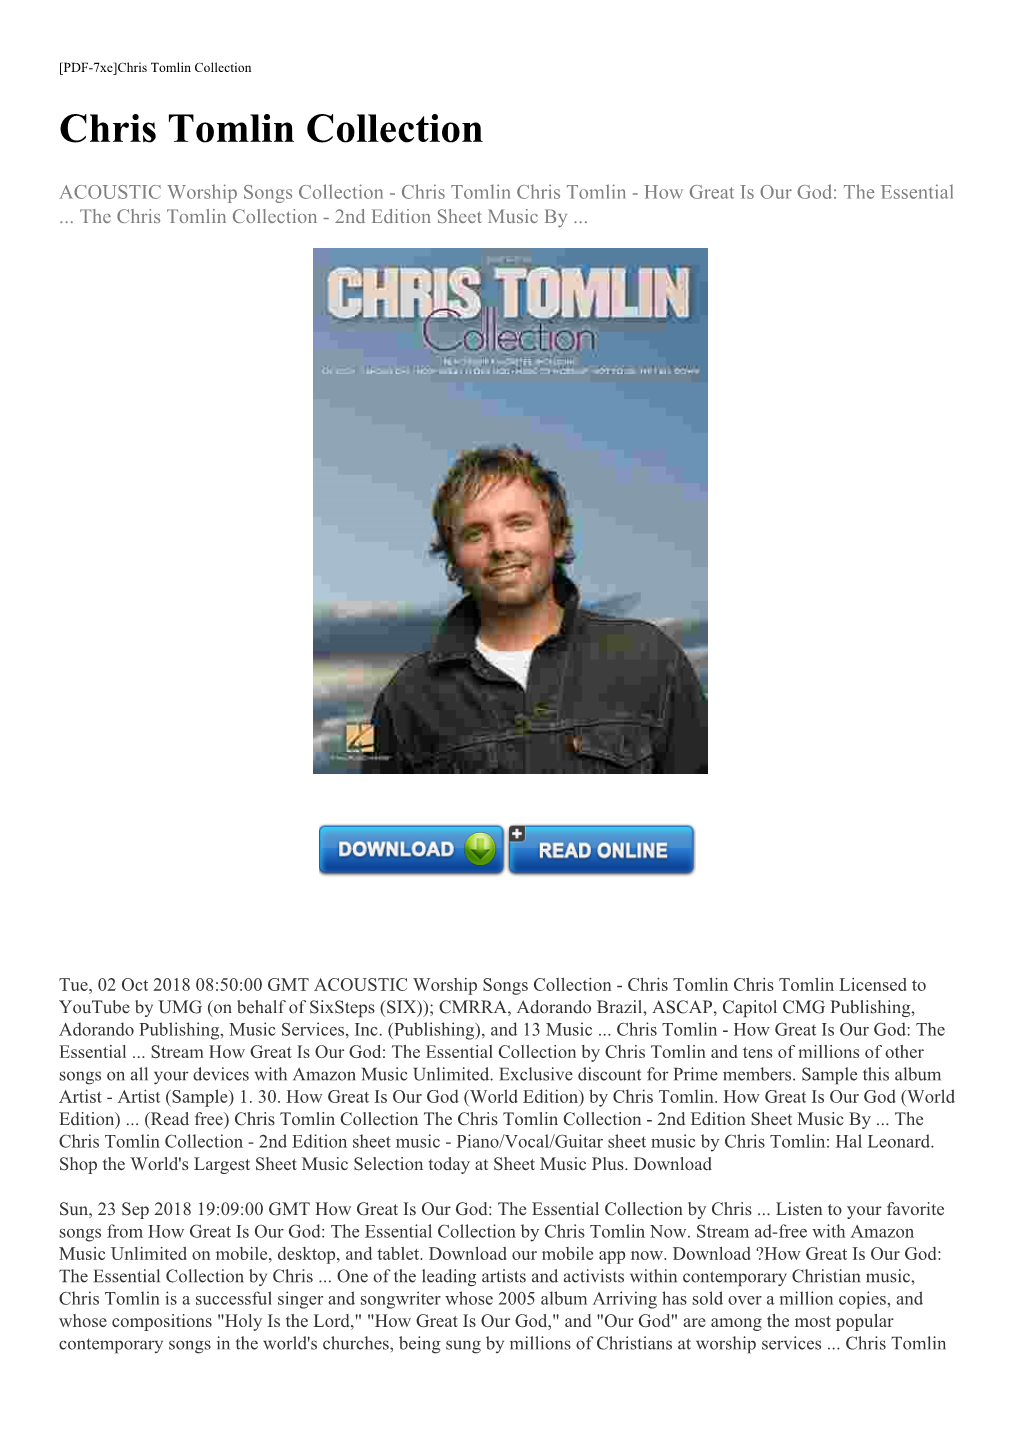 (Read Free) Chris Tomlin Collection the Chris Tomlin Collection - 2Nd Edition Sheet Music by